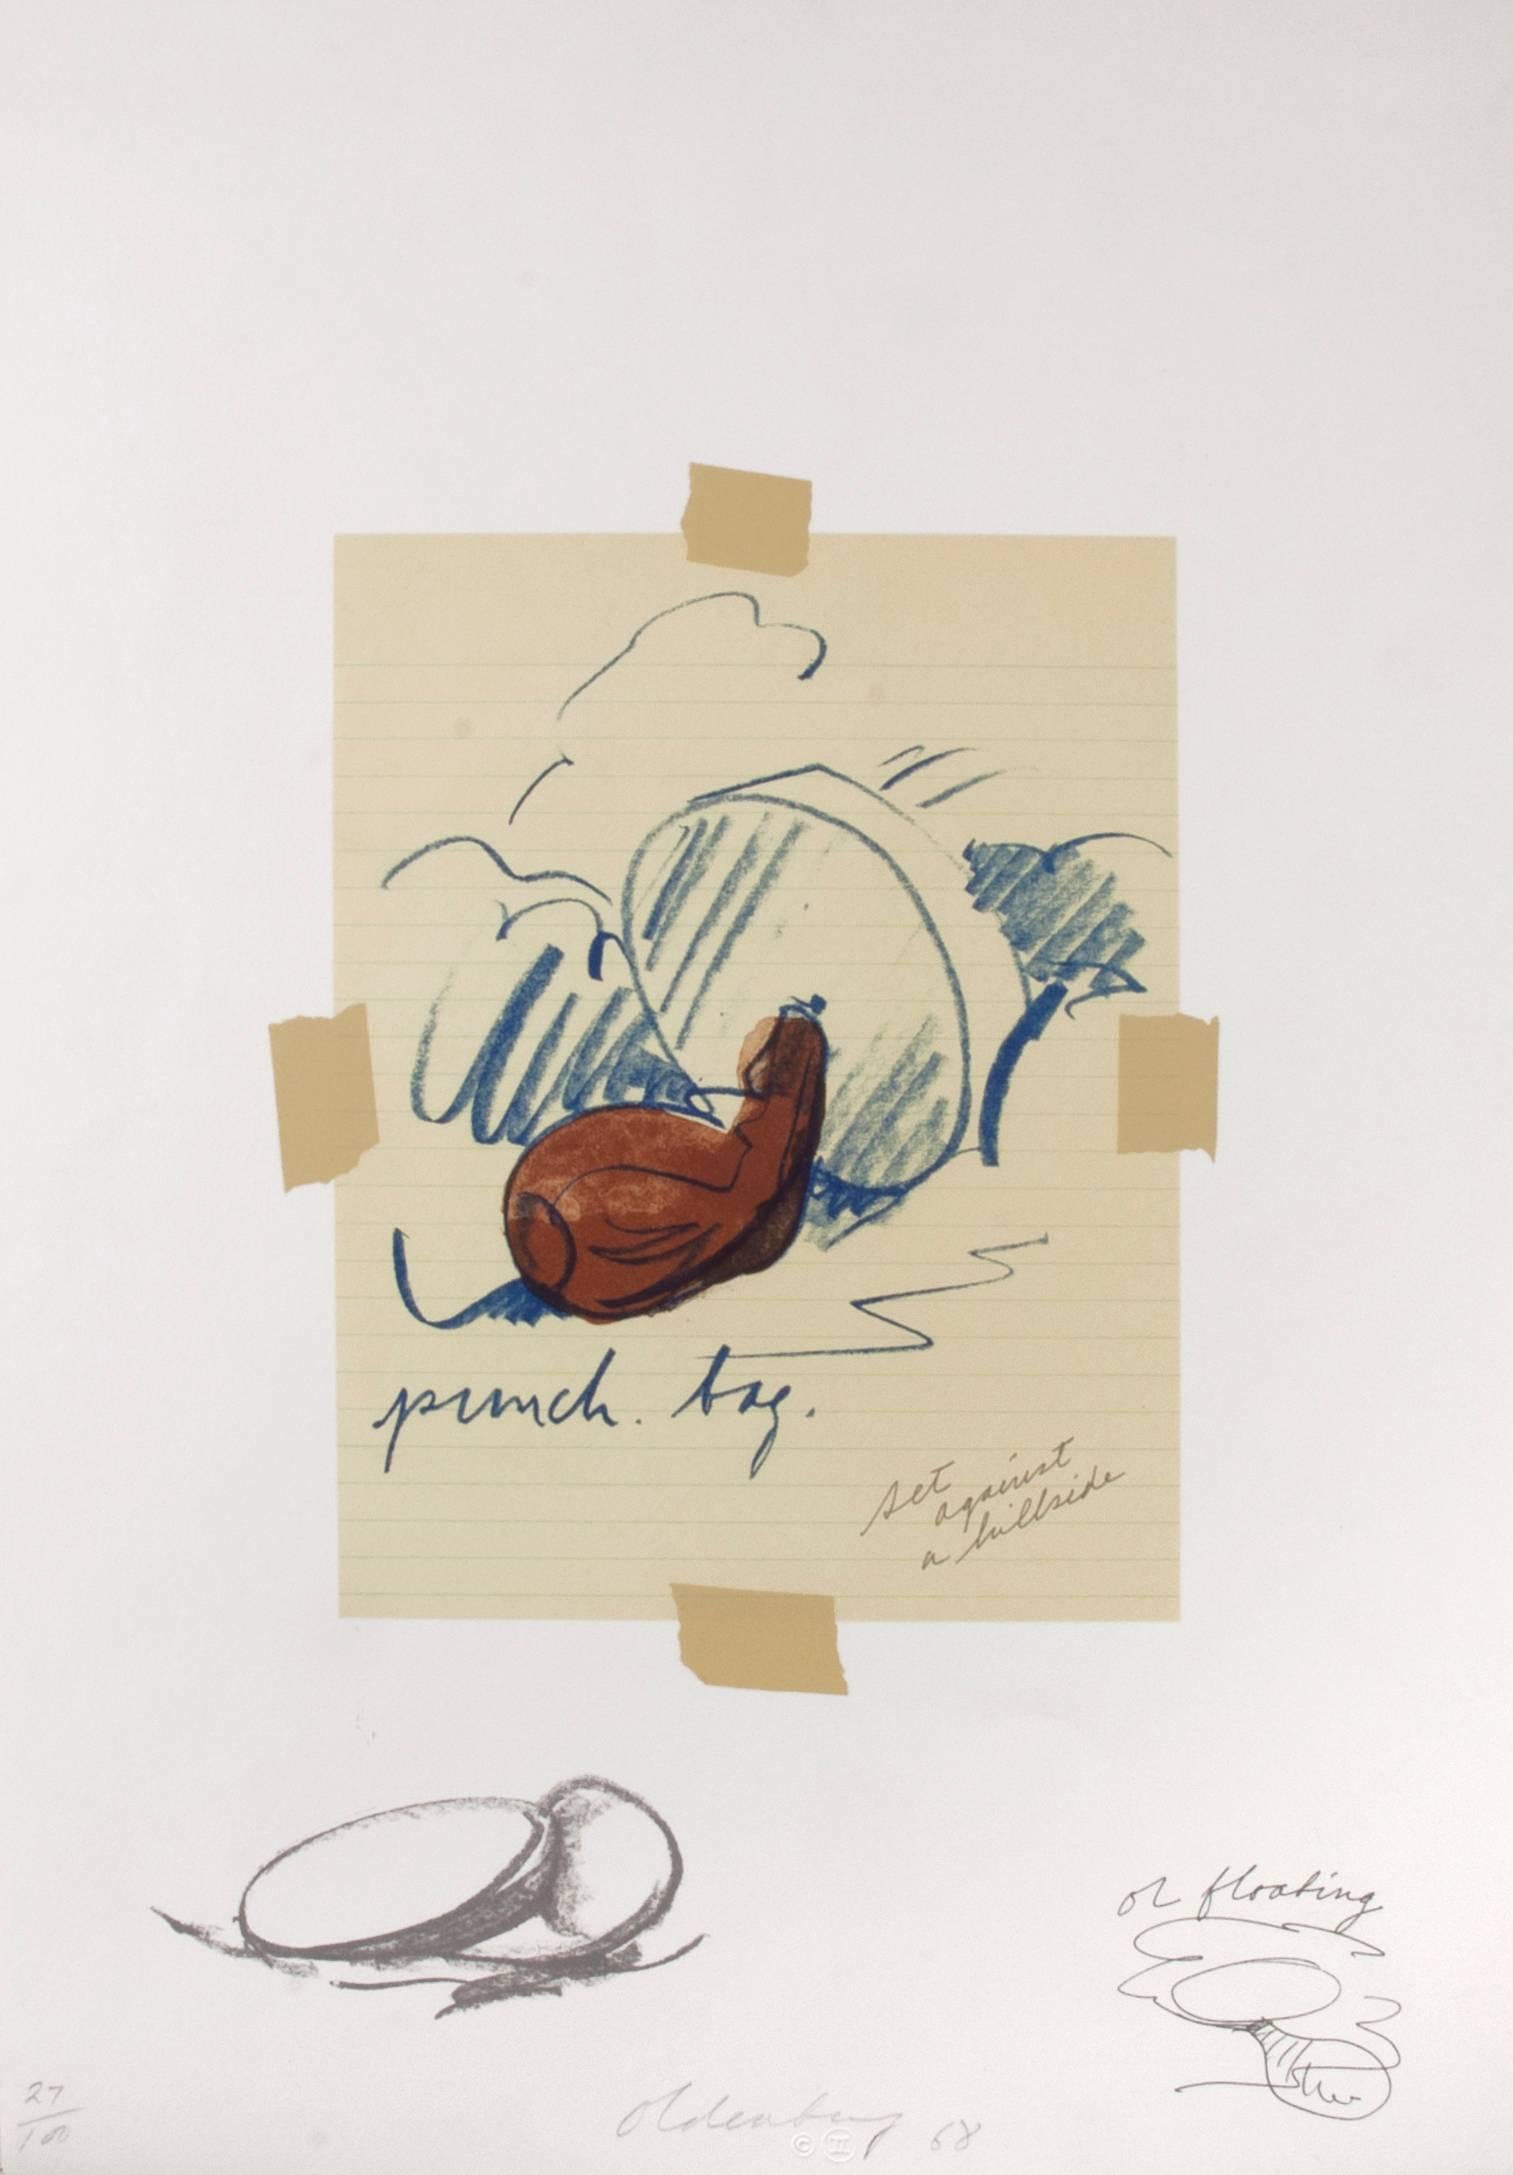 Claes Oldenburg Abstract Print - Untitled (Punching Bag)